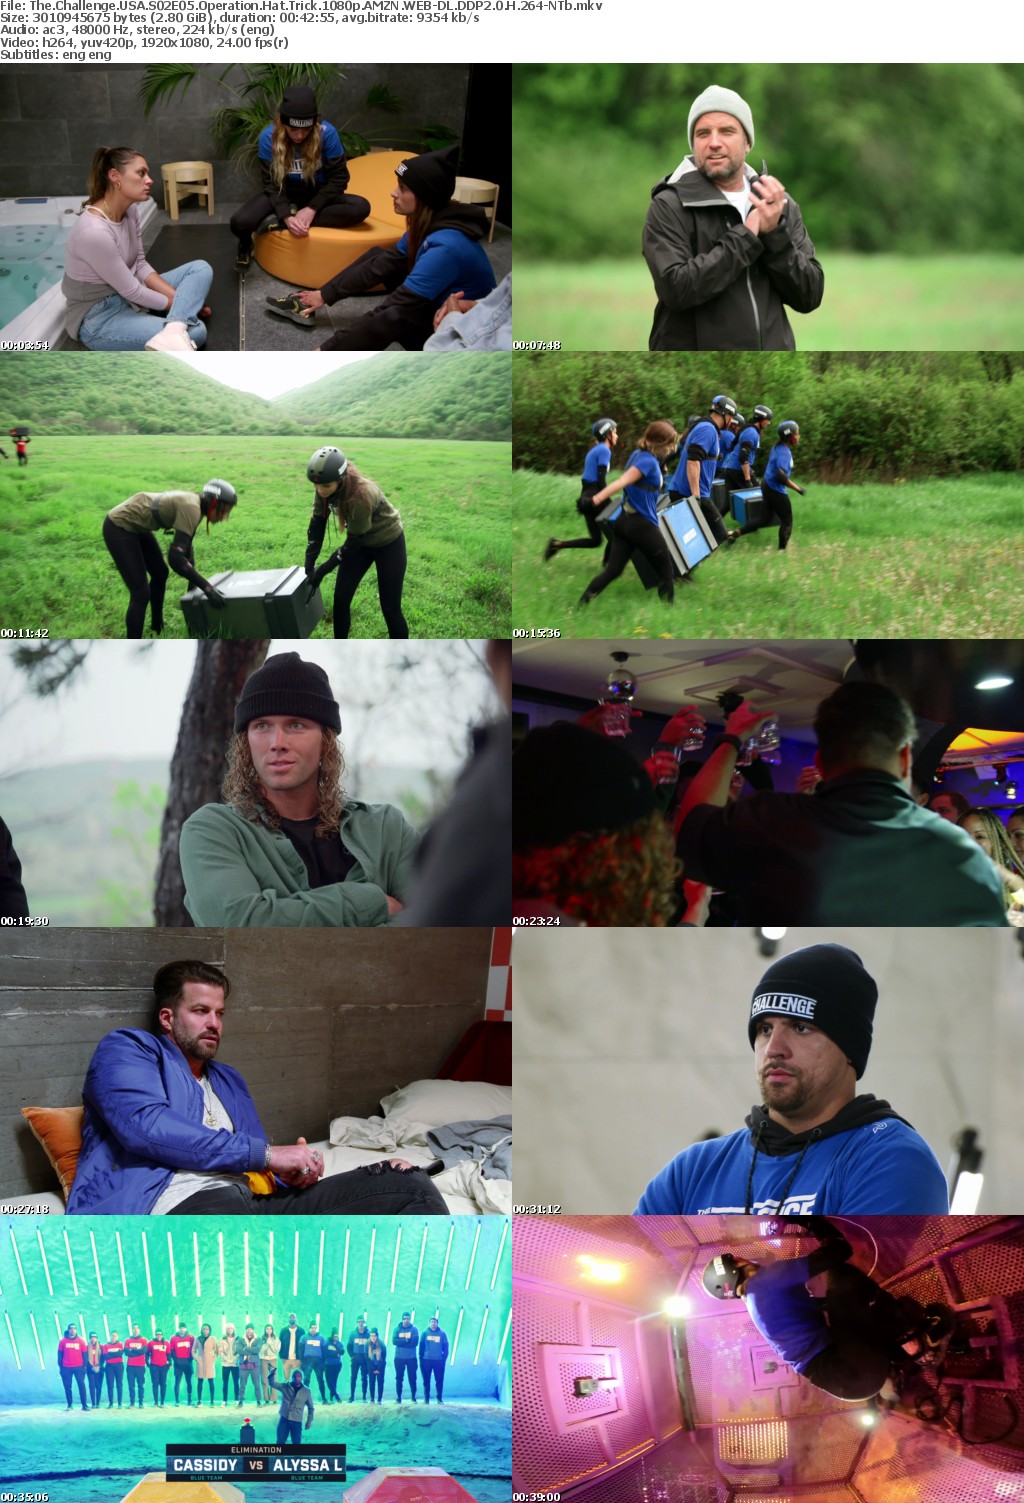 The Challenge USA S02E05 Operation Hat Trick 1080p AMZN WEB-DL DDP2 0 H 264-NTb